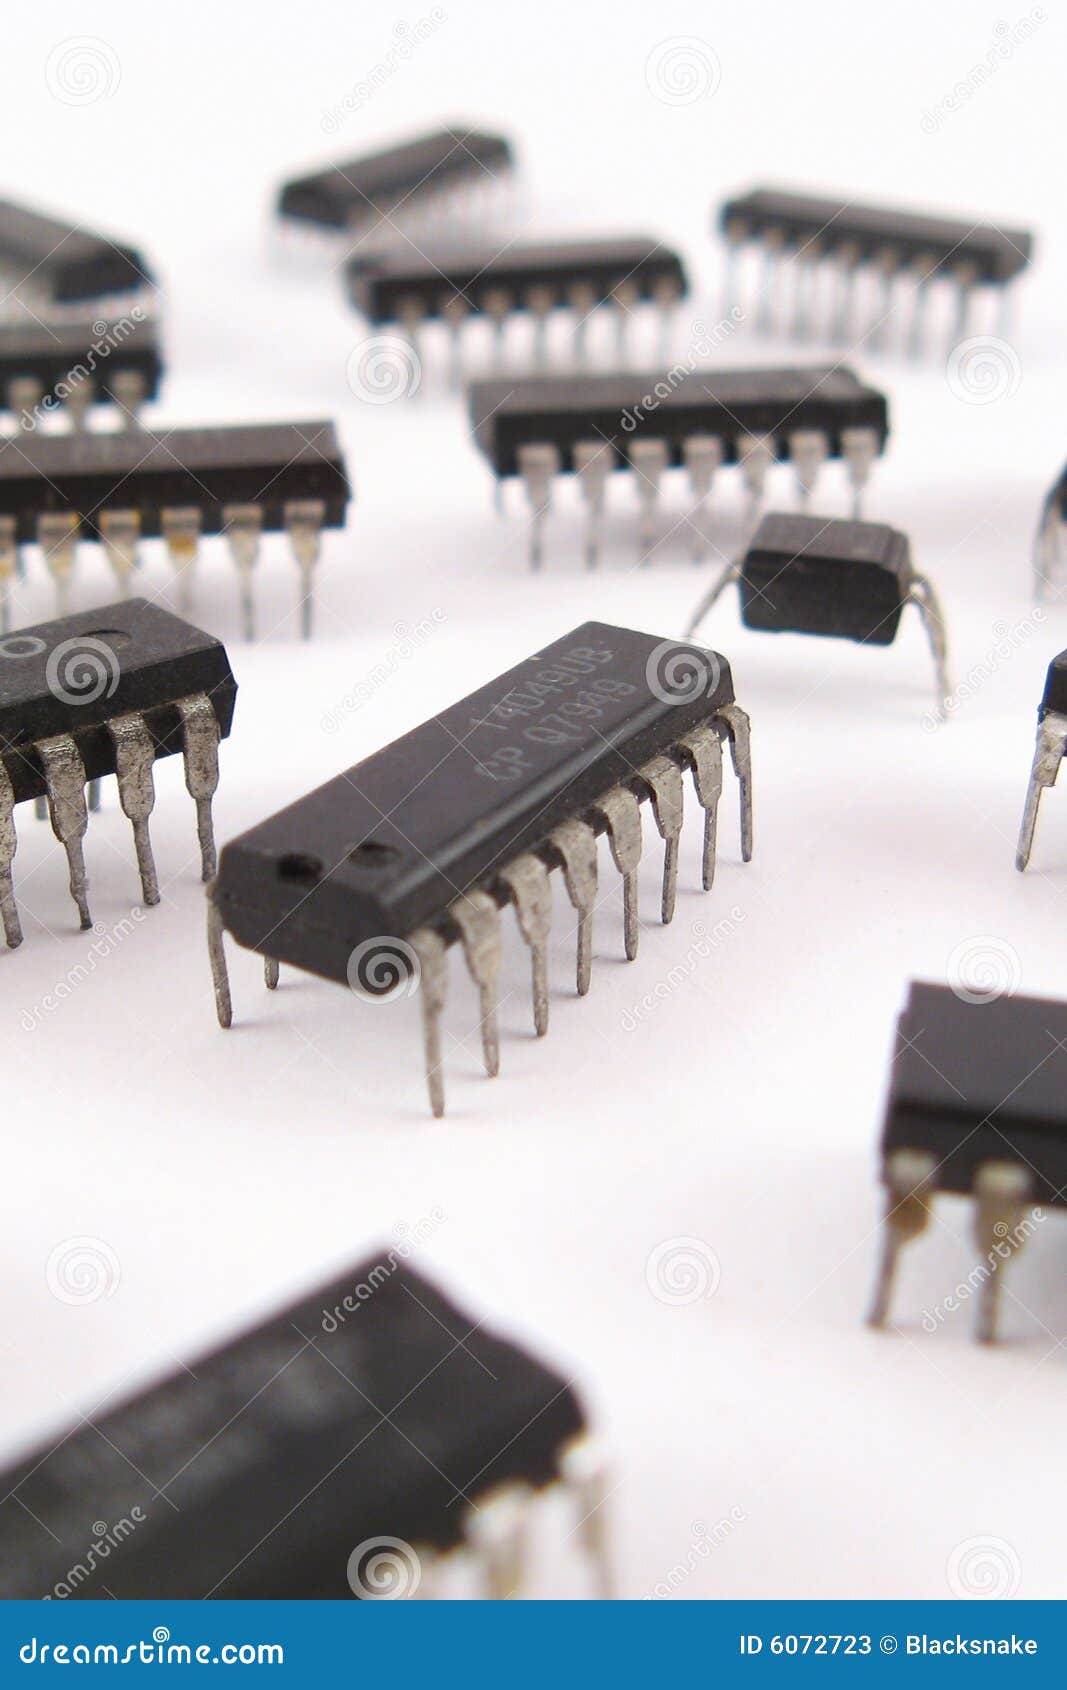 chip integrated circuits